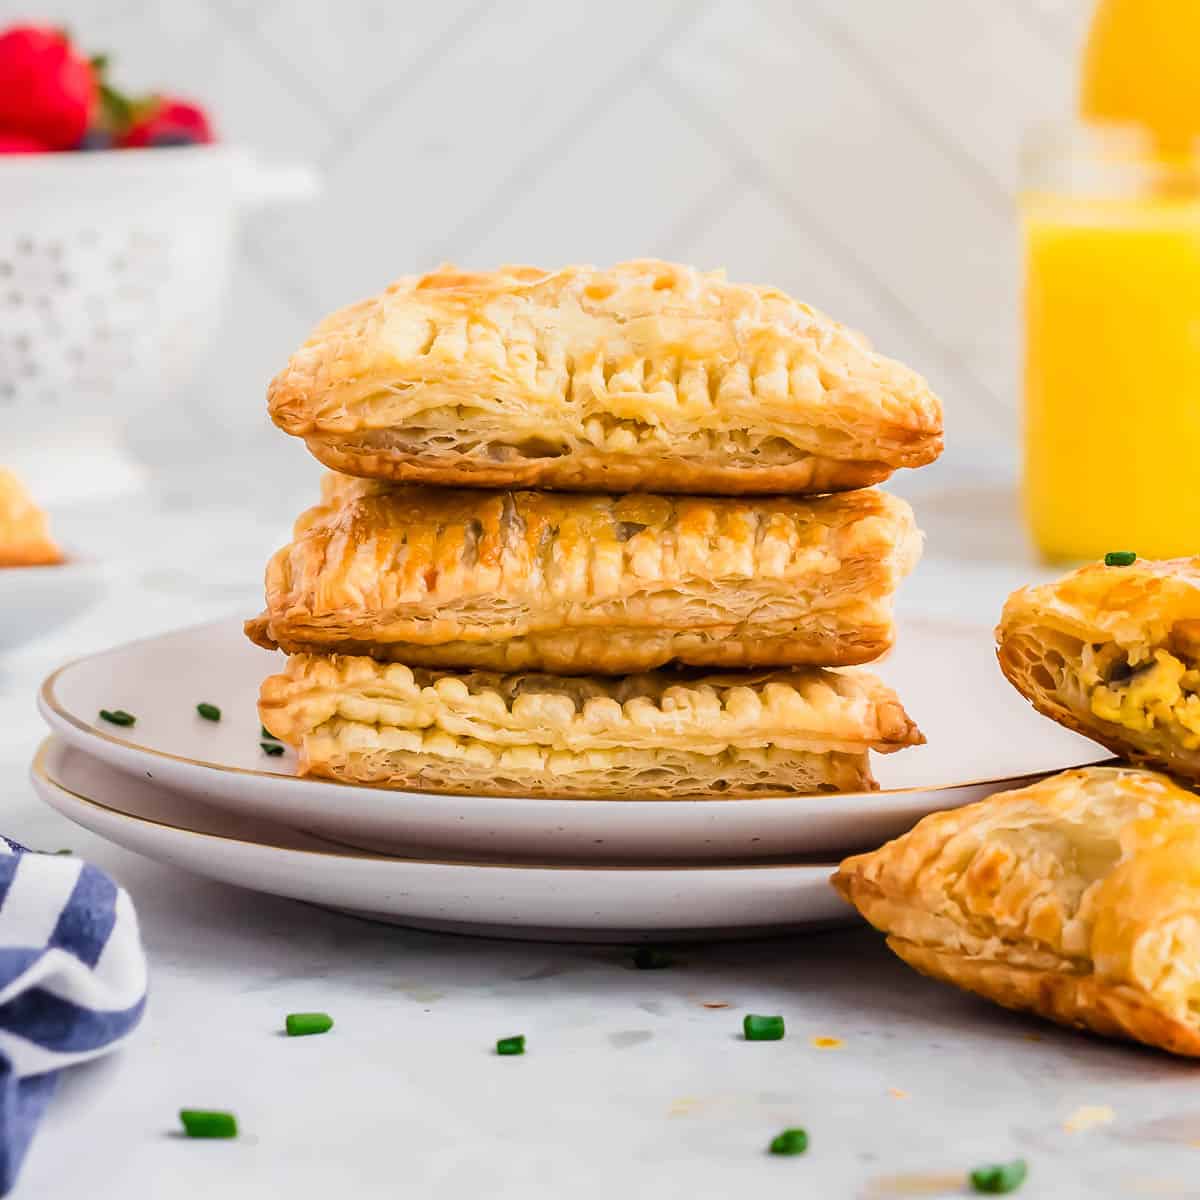 A stack of breakfast hot pocket pastries on a plate next to orange juice.